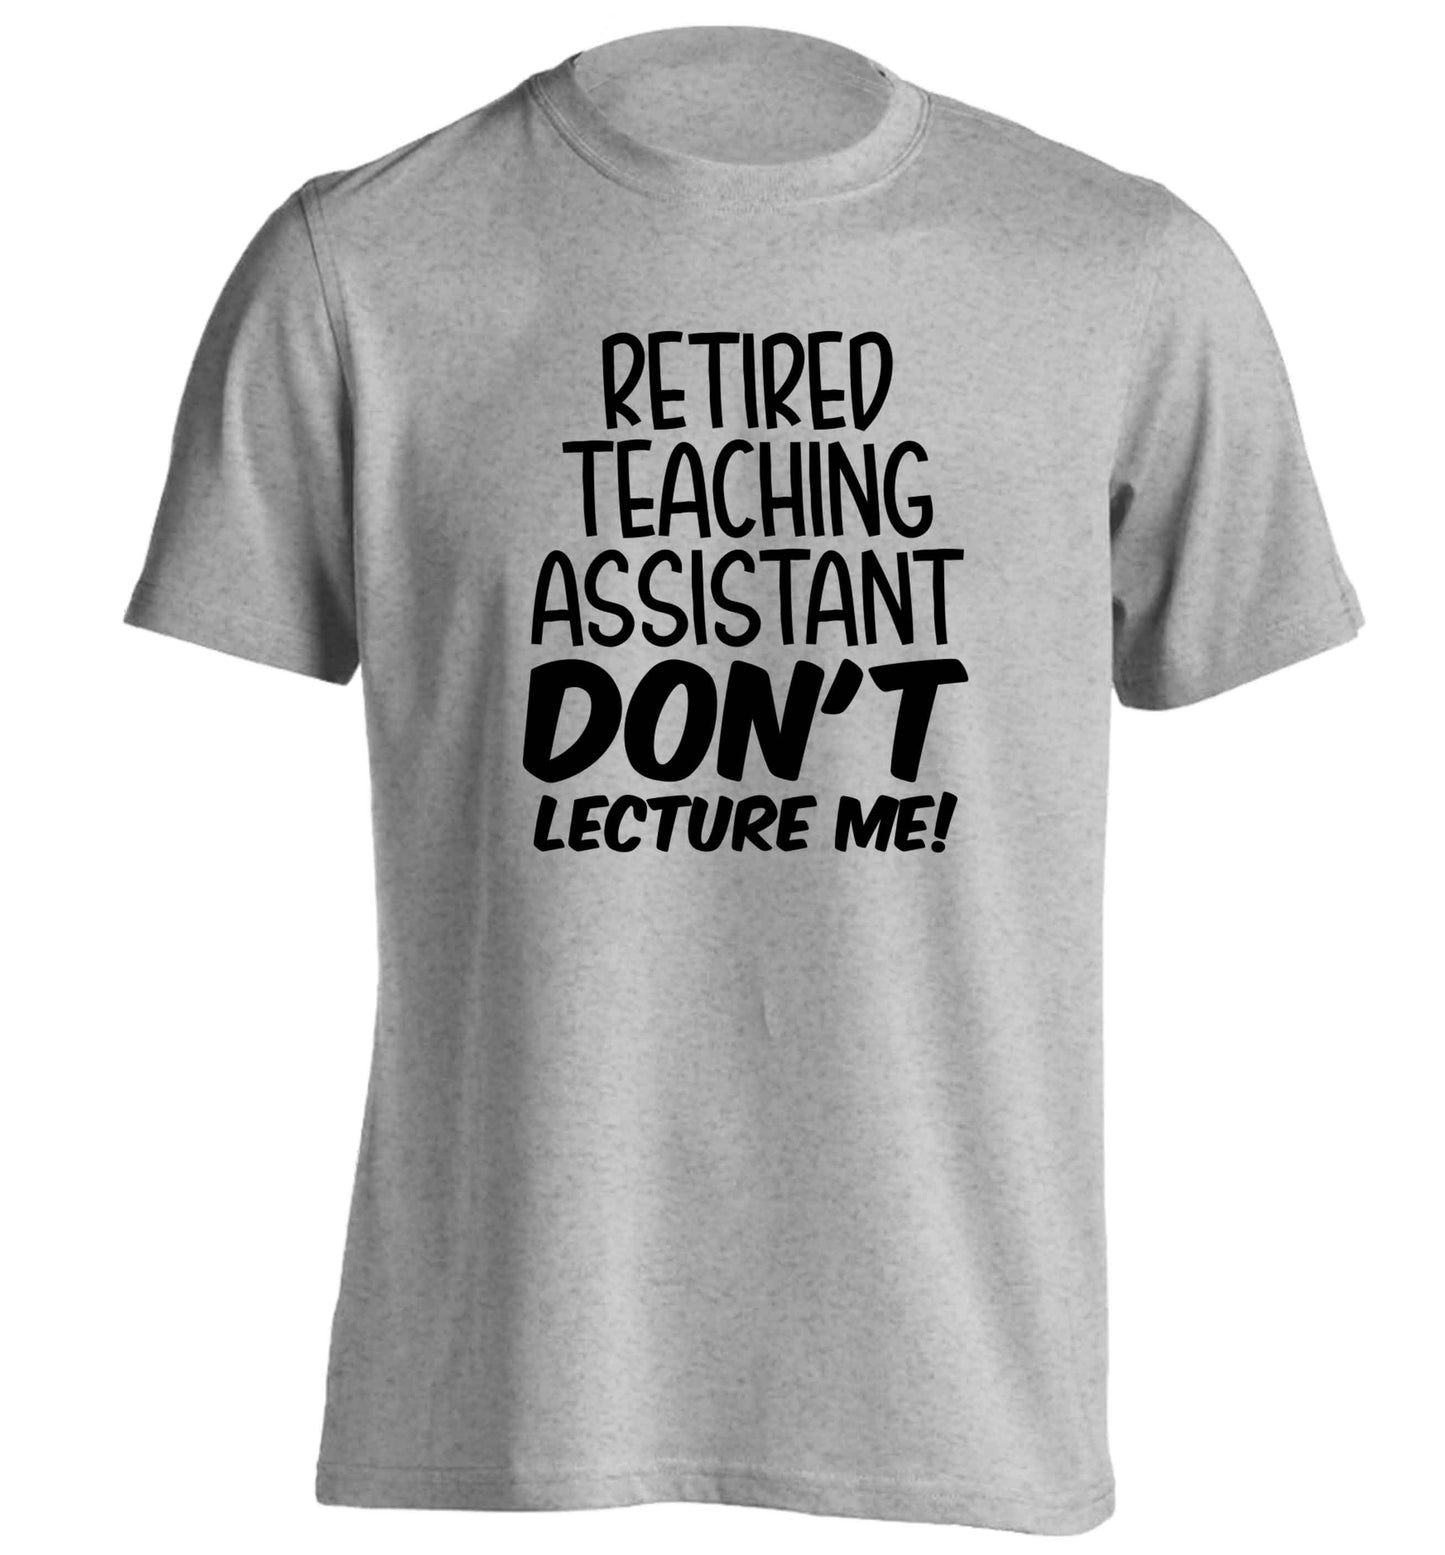 Retired teaching assistant don't lecture me adults unisex grey Tshirt 2XL